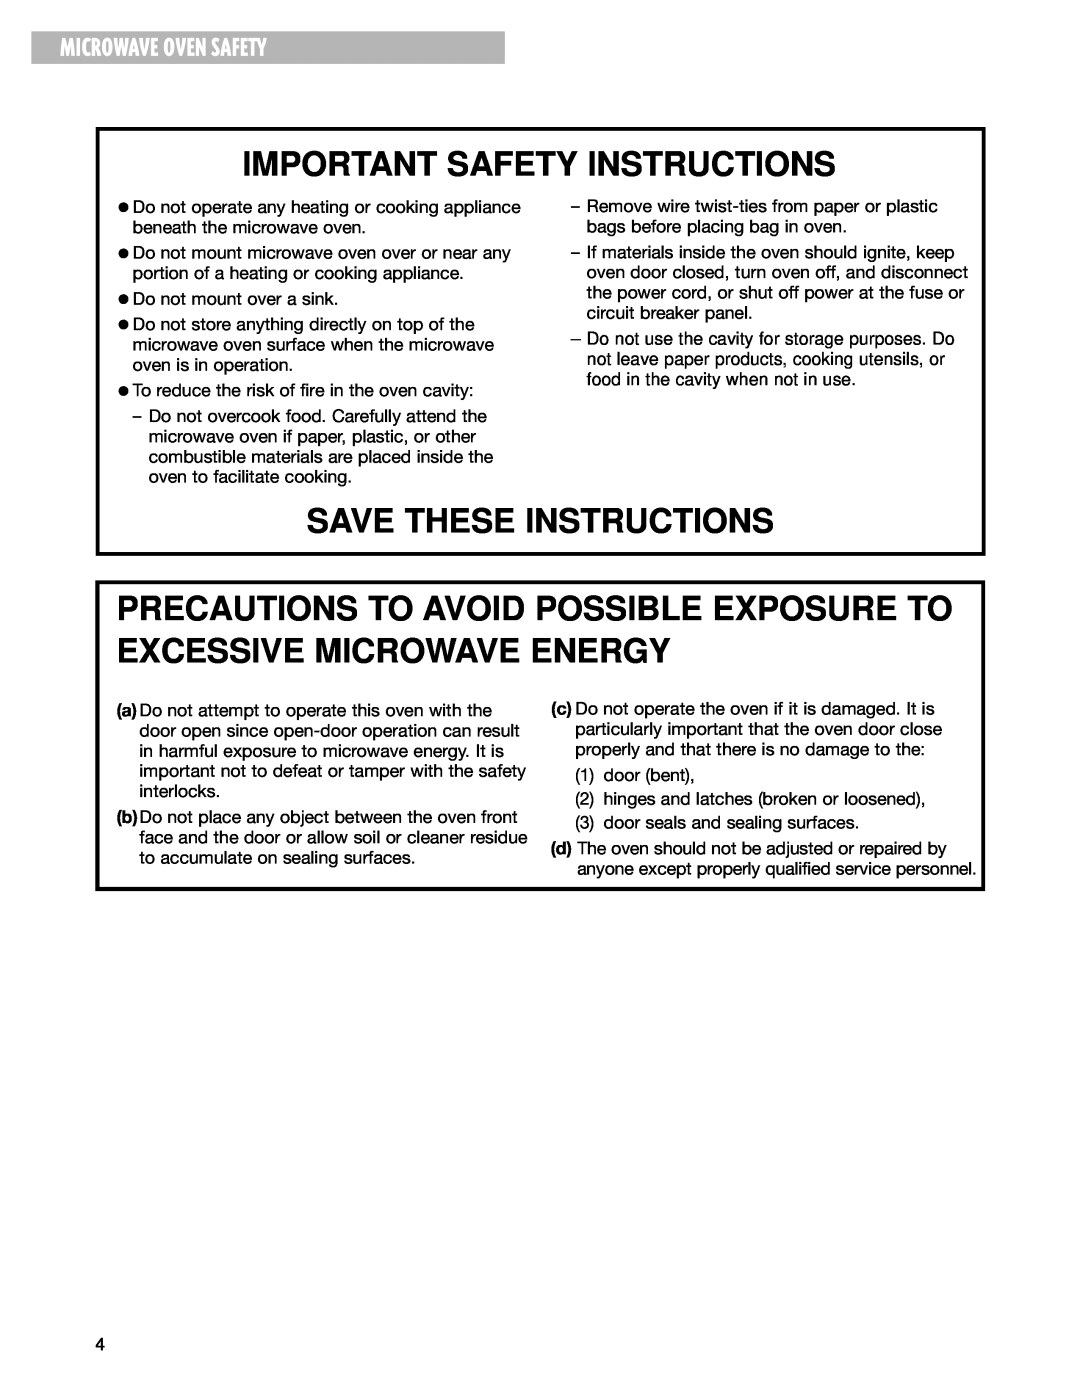 Whirlpool GM8155XJ Precautions To Avoid Possible Exposure To Excessive Microwave Energy, Microwave Oven Safety 